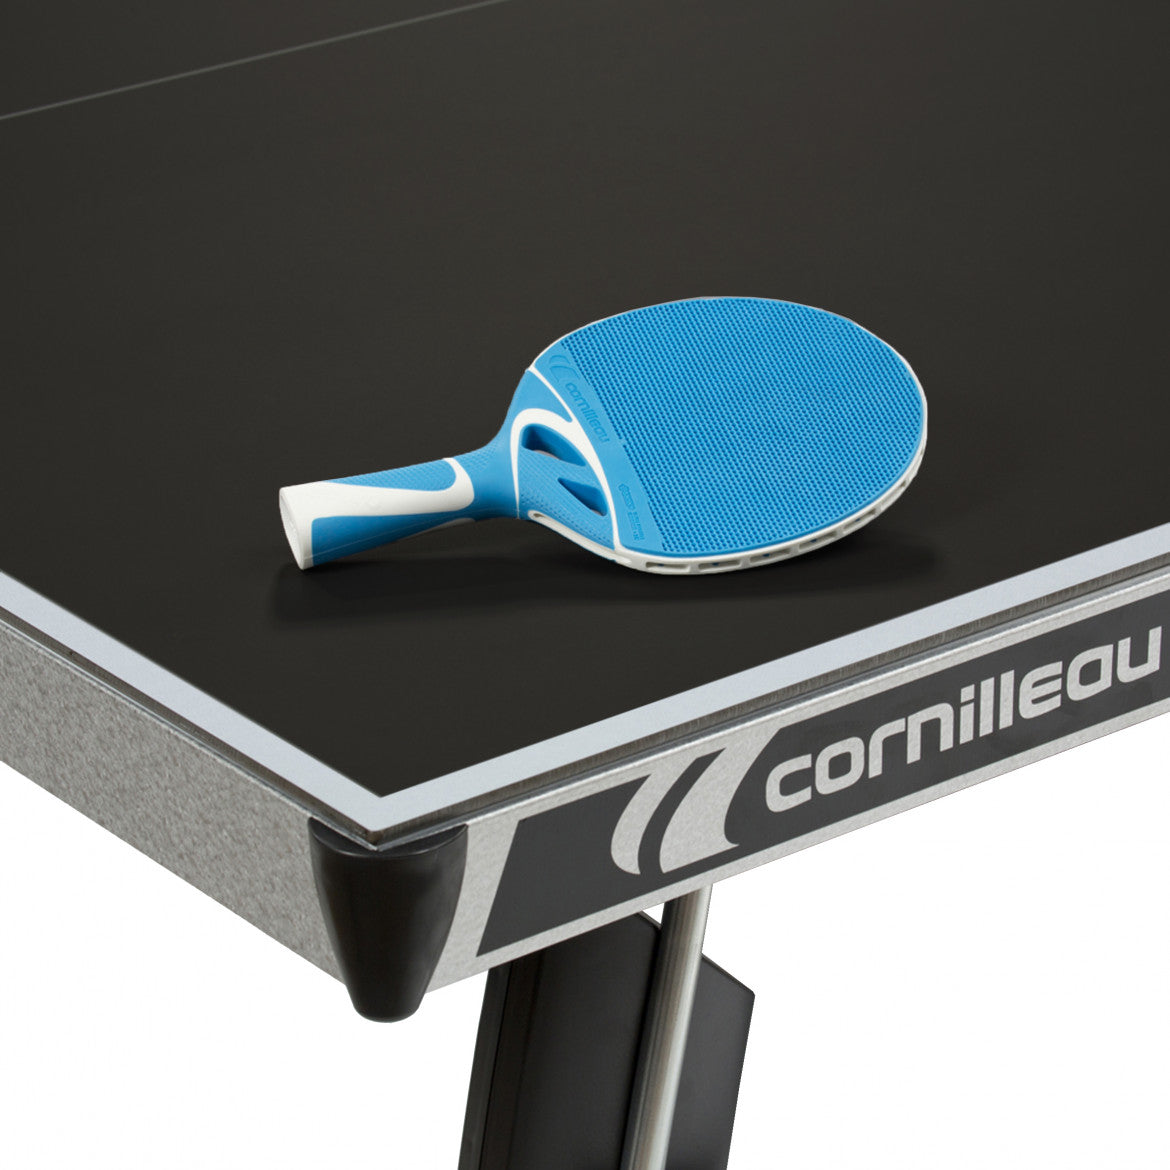 Cornilleau Pro 540M Crossover Outdoor Table Tennis Table